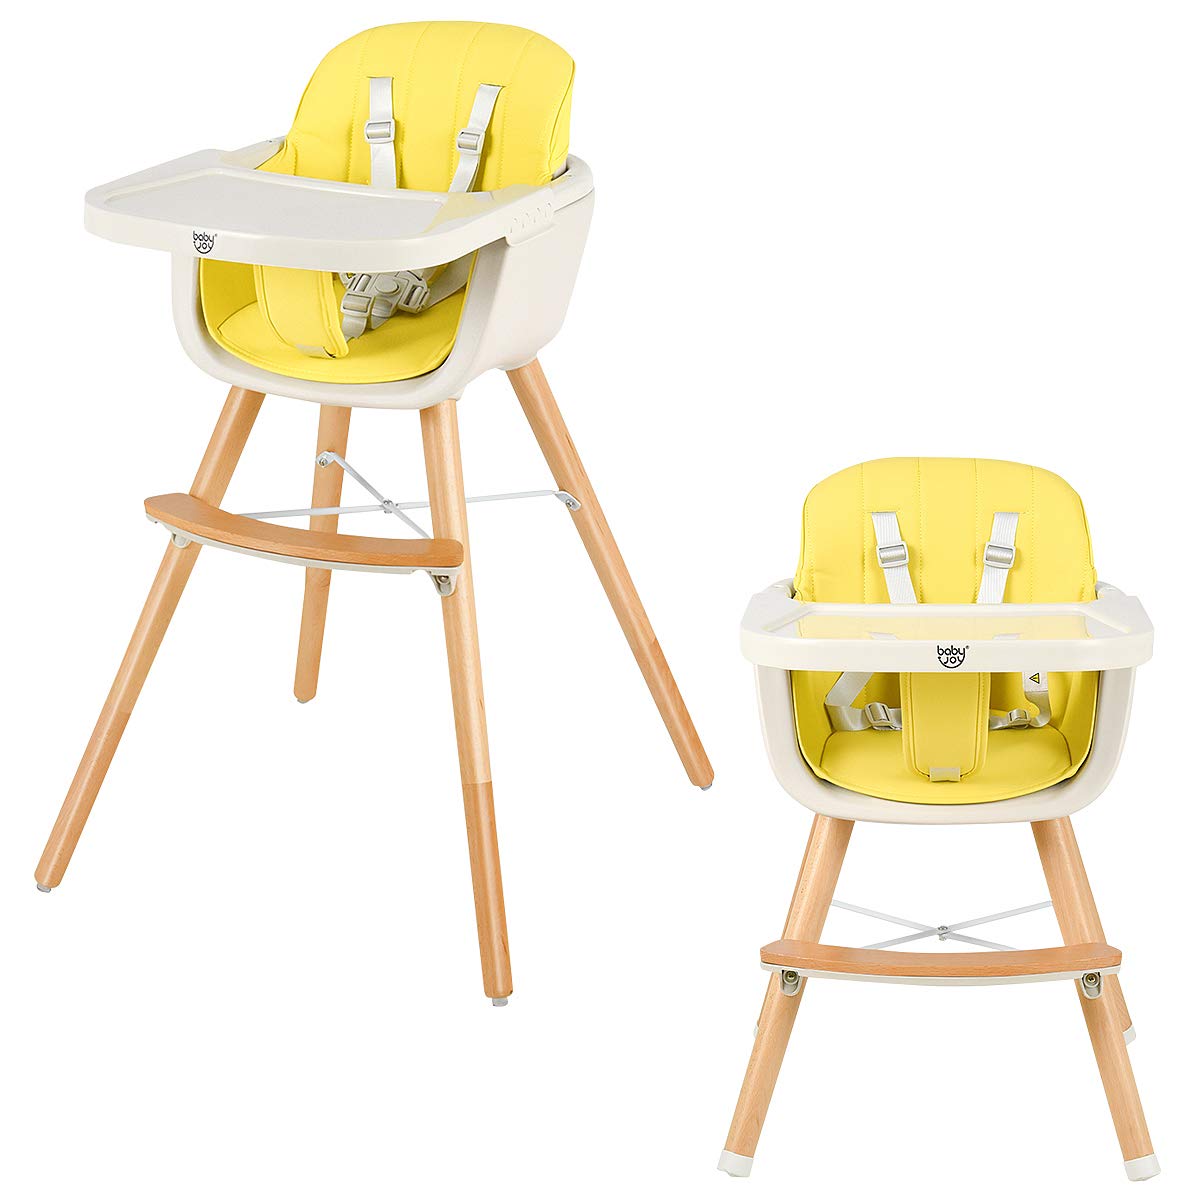 BABY JOY Baby High Chair, Foldable Highchair w/ 7 Heights, 5